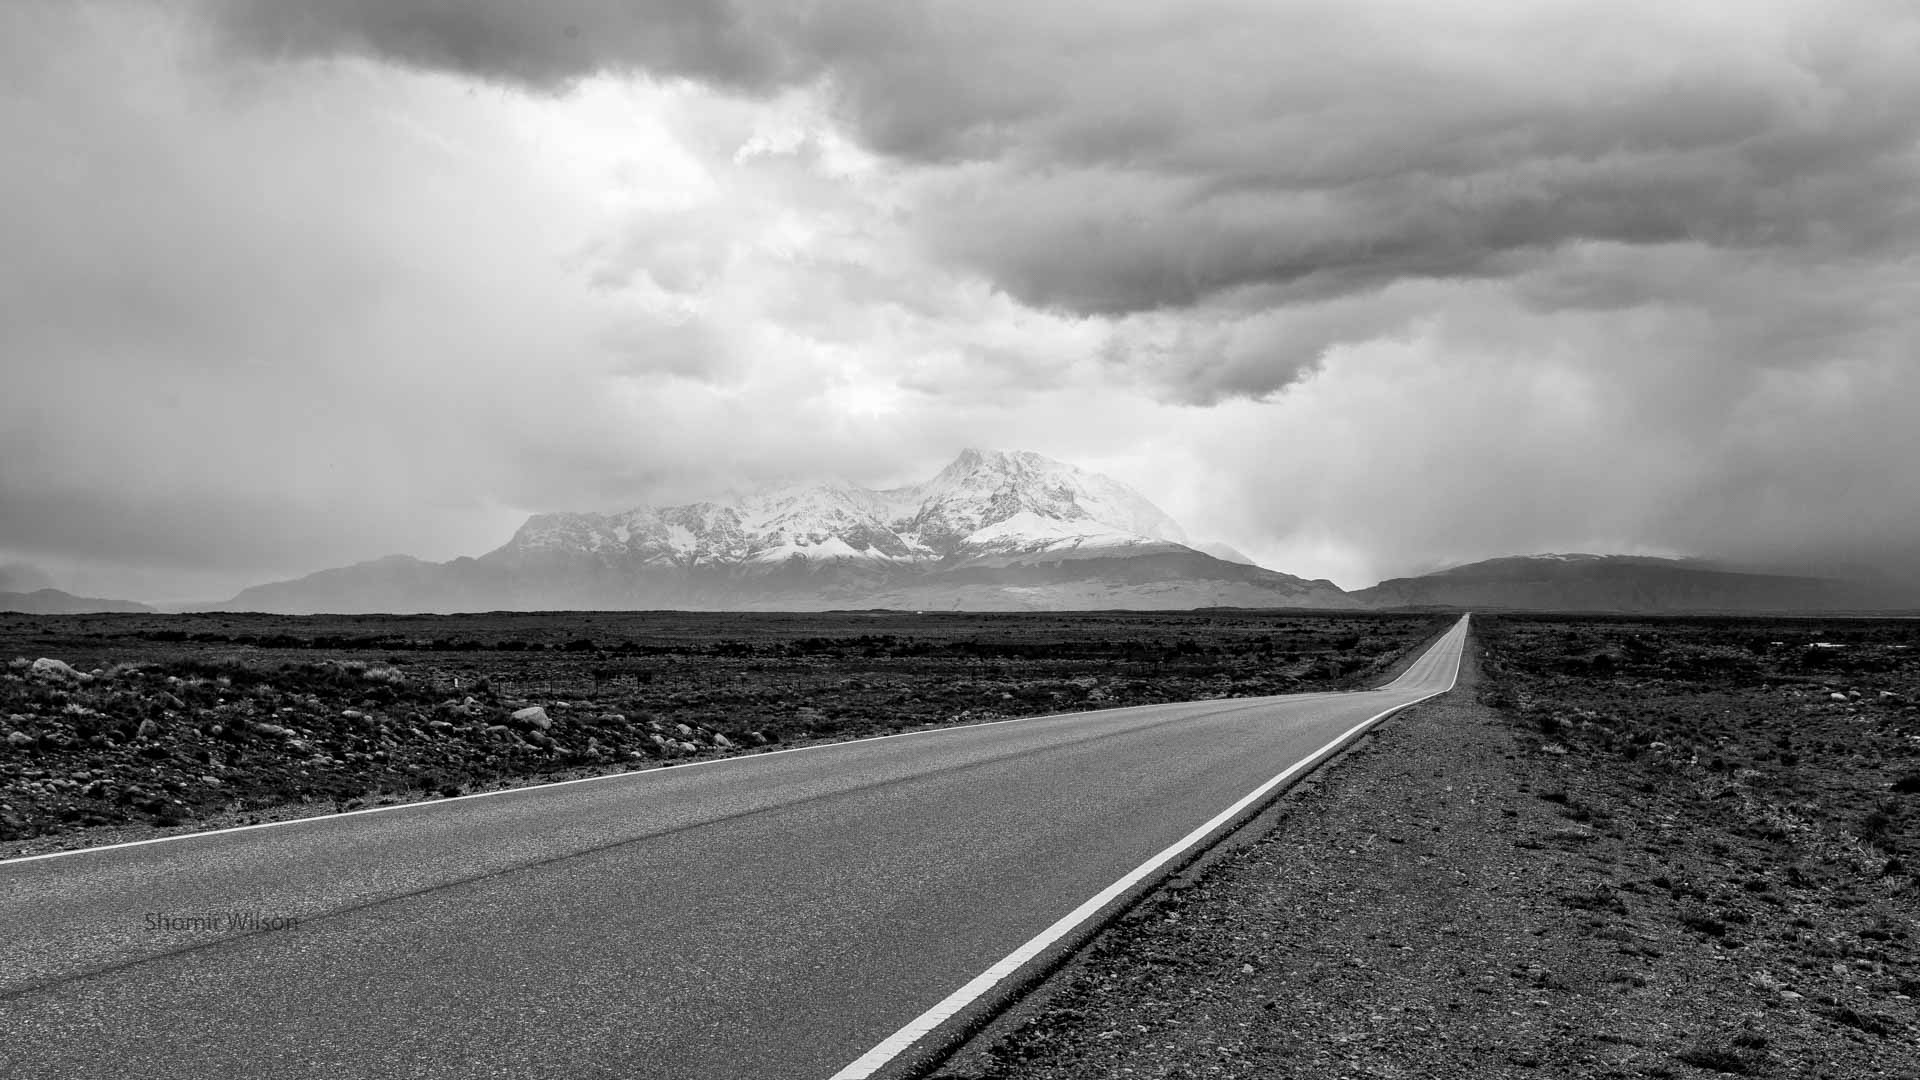 in monochrome: a two-lane road straight into the far distance across a rocky desert, with snow-capped mountains in the distance and heavy clouds above